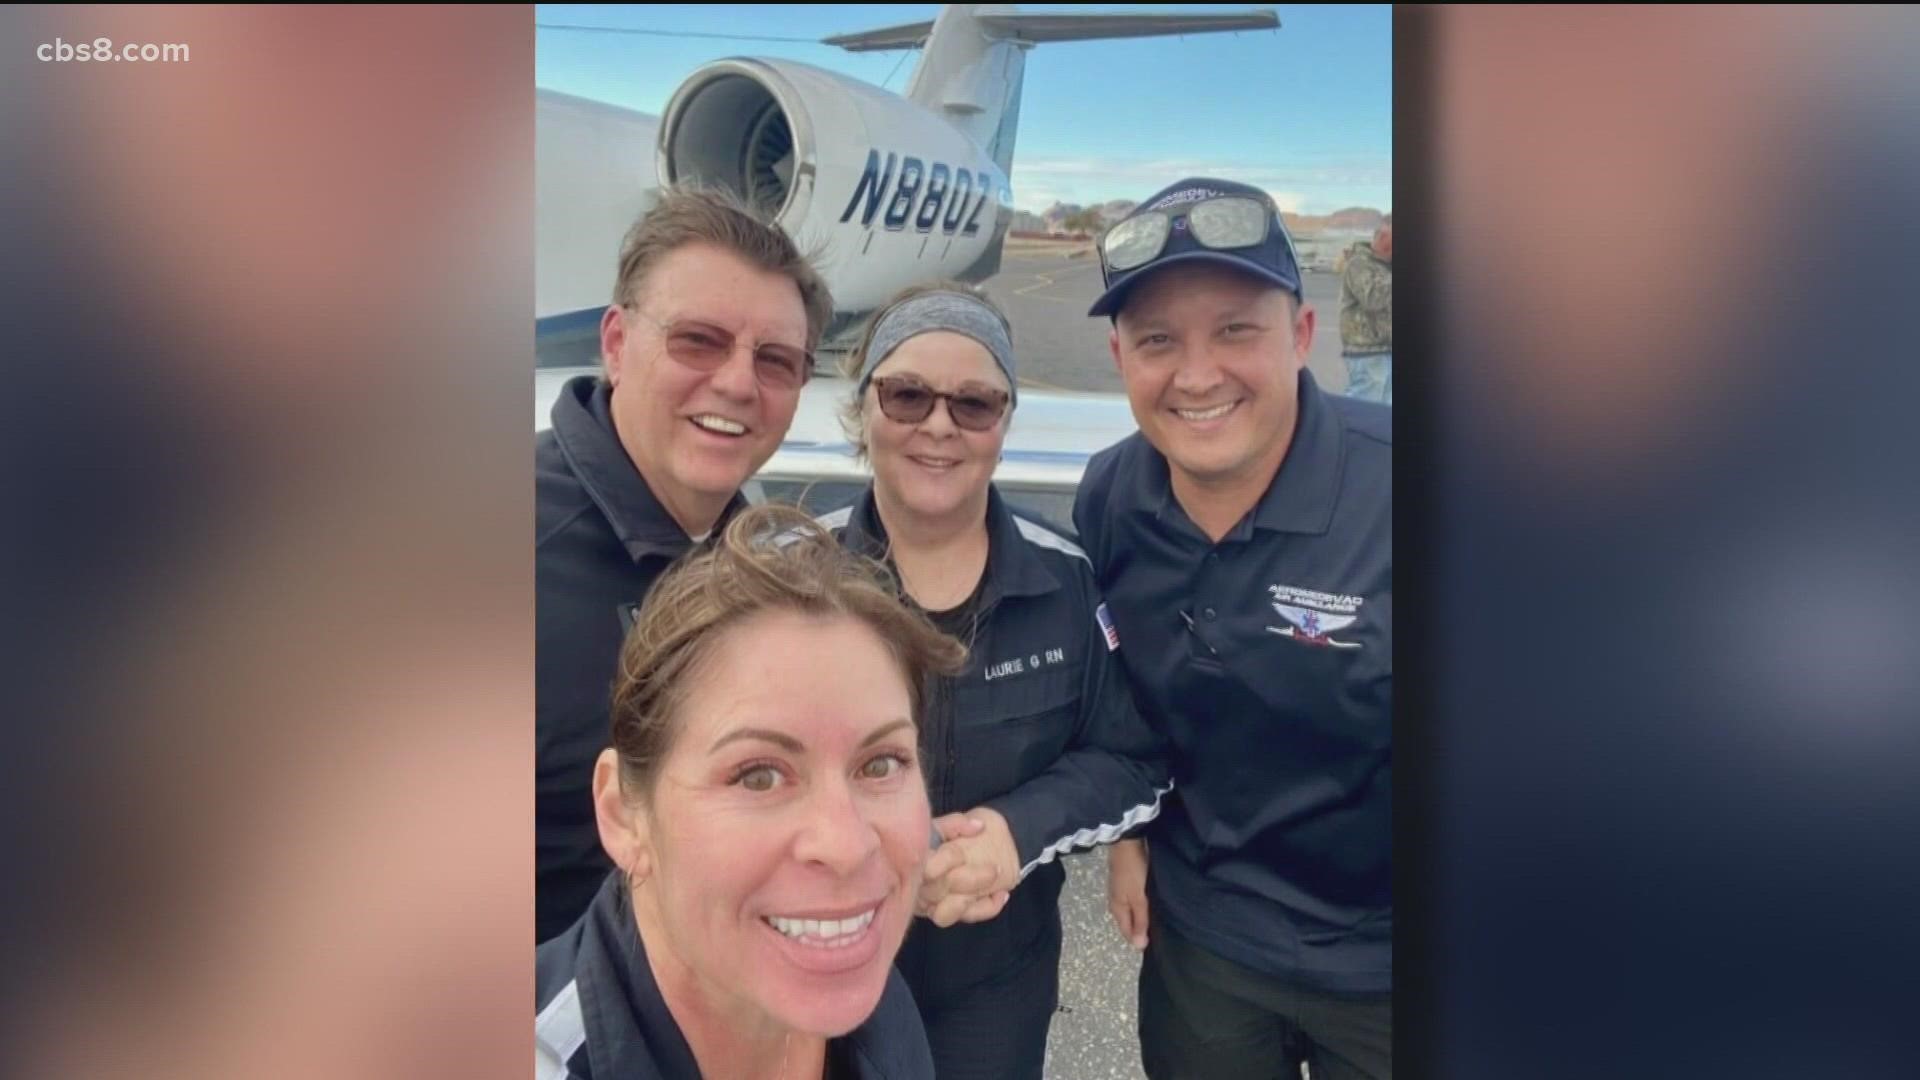 Two nurses aboard the flight were identified by colleagues. The two pilots were identified Wednesday by the San Diego Medical Examiner's office.